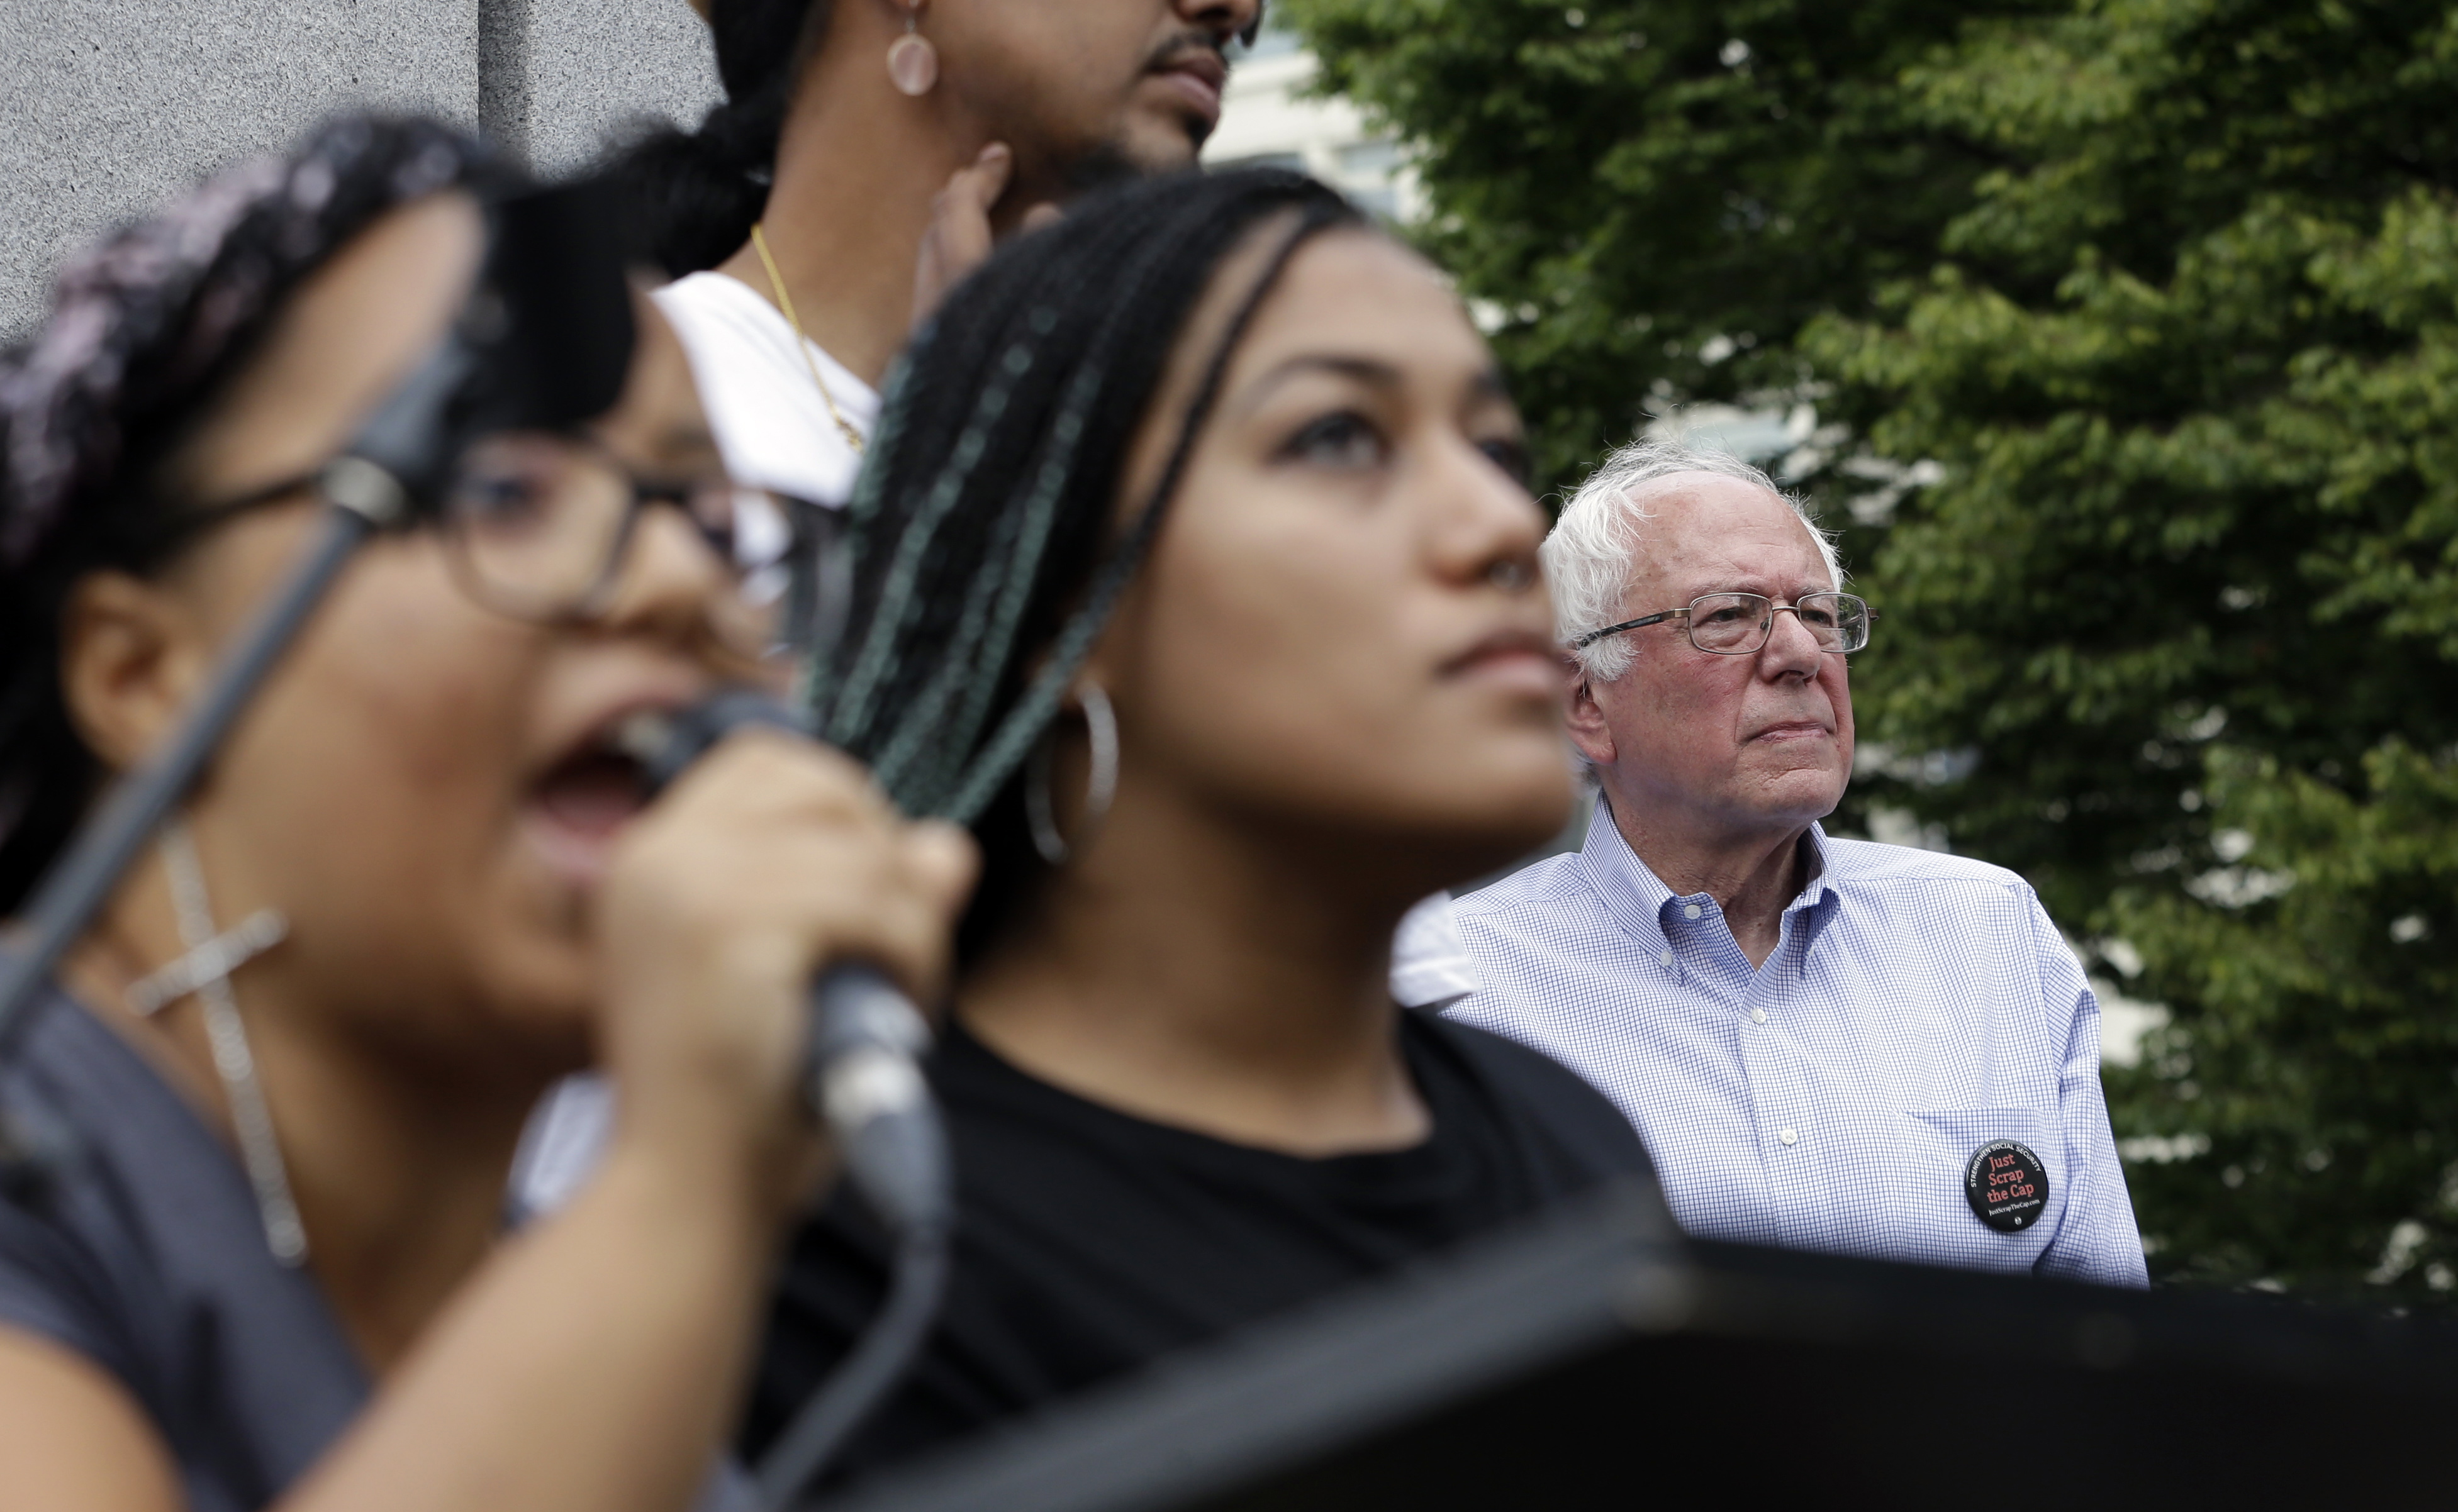 Marissa Johnson, left, speaks as Mara Jacqueline Willaford stands with her and Democratic presidential candidate Sen. Bernie Sanders, I-Vt., stands nearby as the two women take over the microphone at a rally on Aug. 8, 2015, in downtown Seattle. (Elaine Thompson—AP)